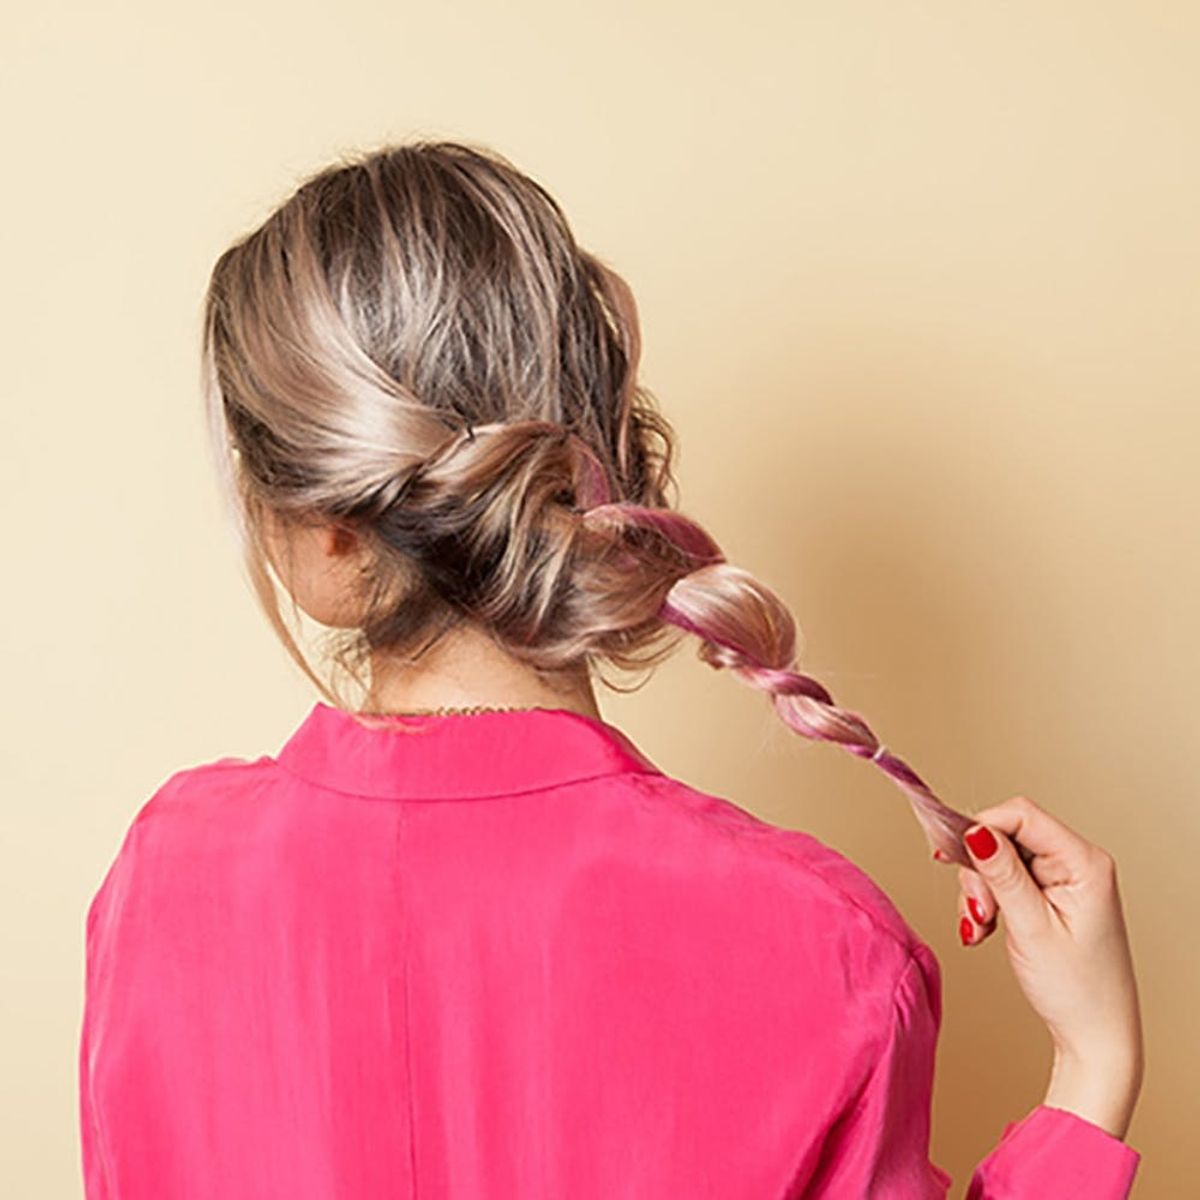 The Best Braid for Your Laziest Winter Days